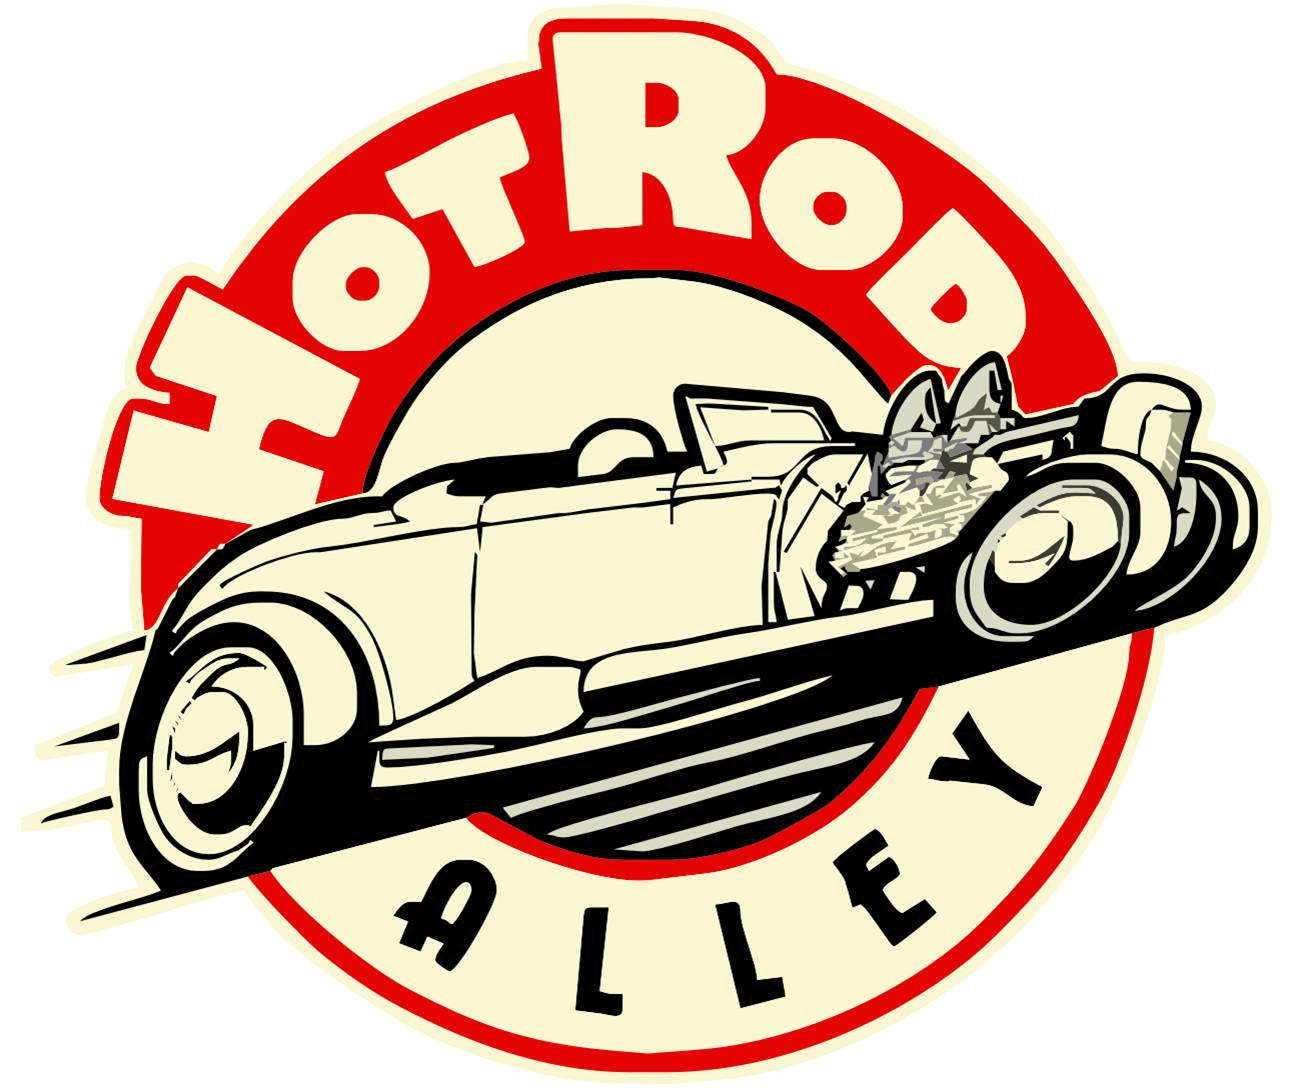 Hot Rod Logo - old hot rod logos - Google Search | old logos | Hot rods, Cars, Old ...